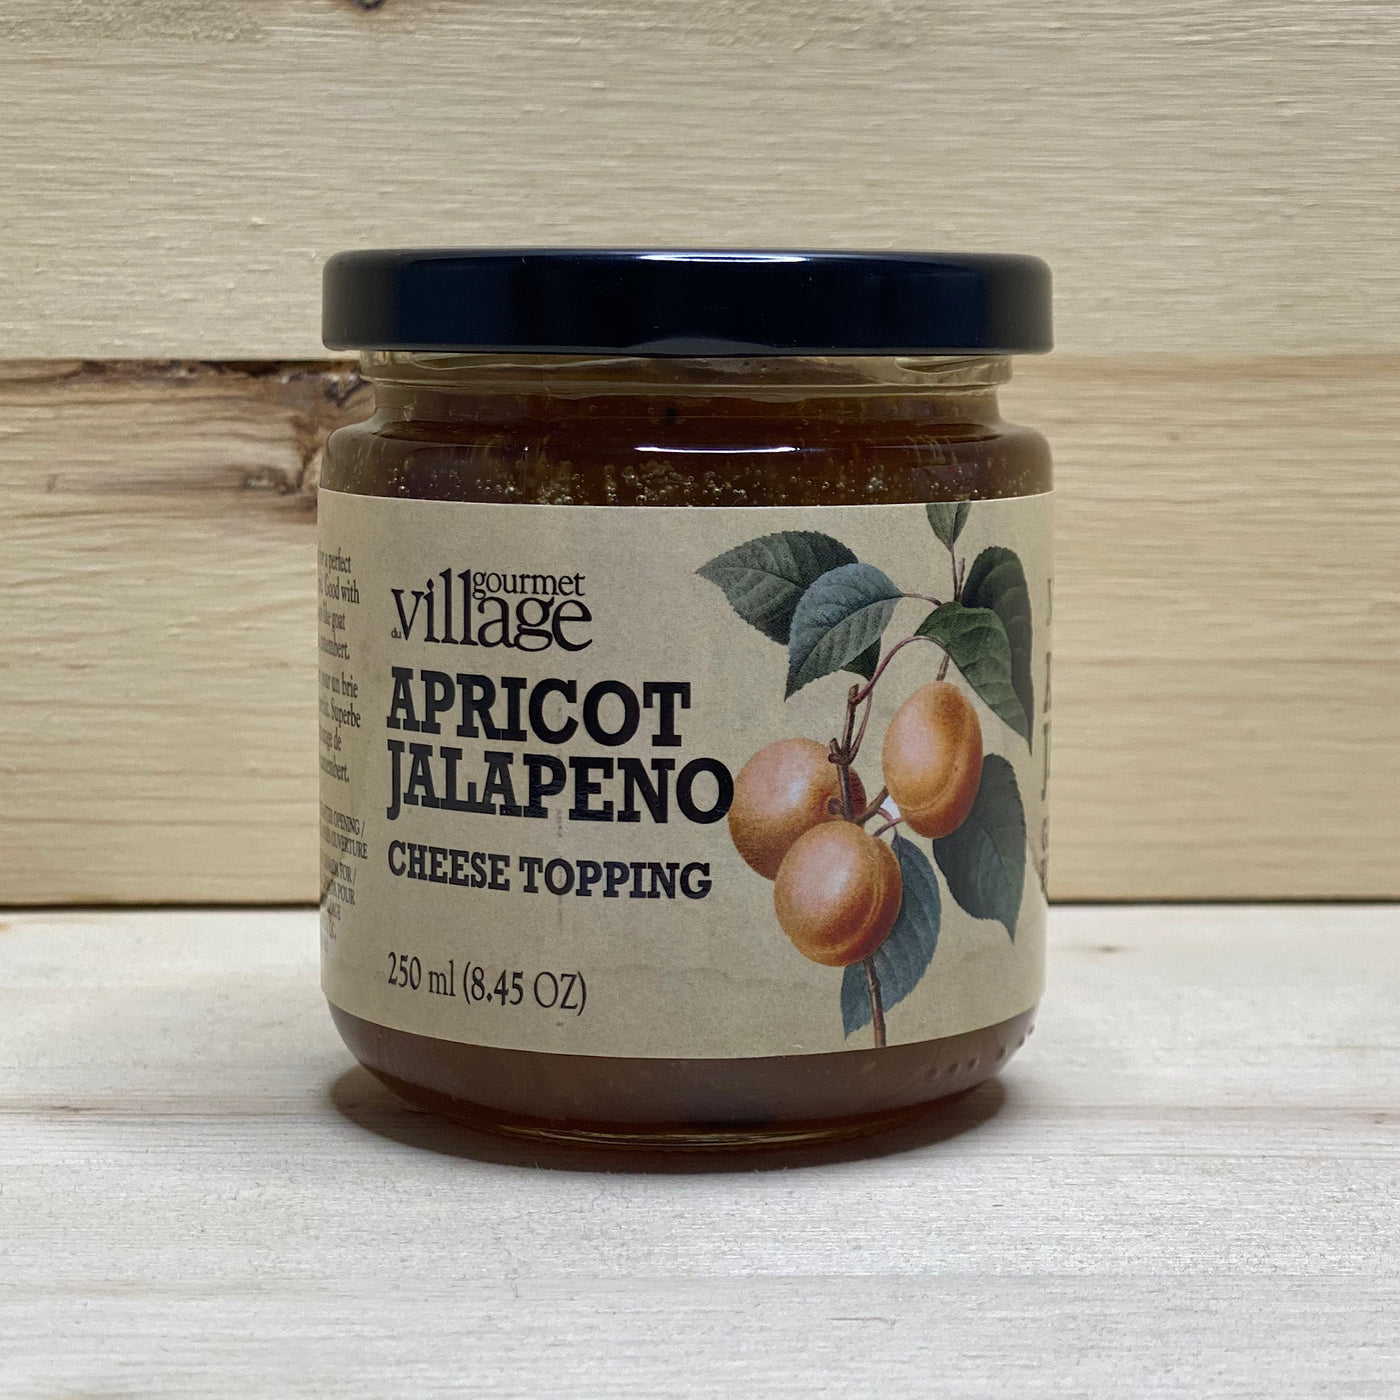 Cheese Topping Apricot Jalapeno